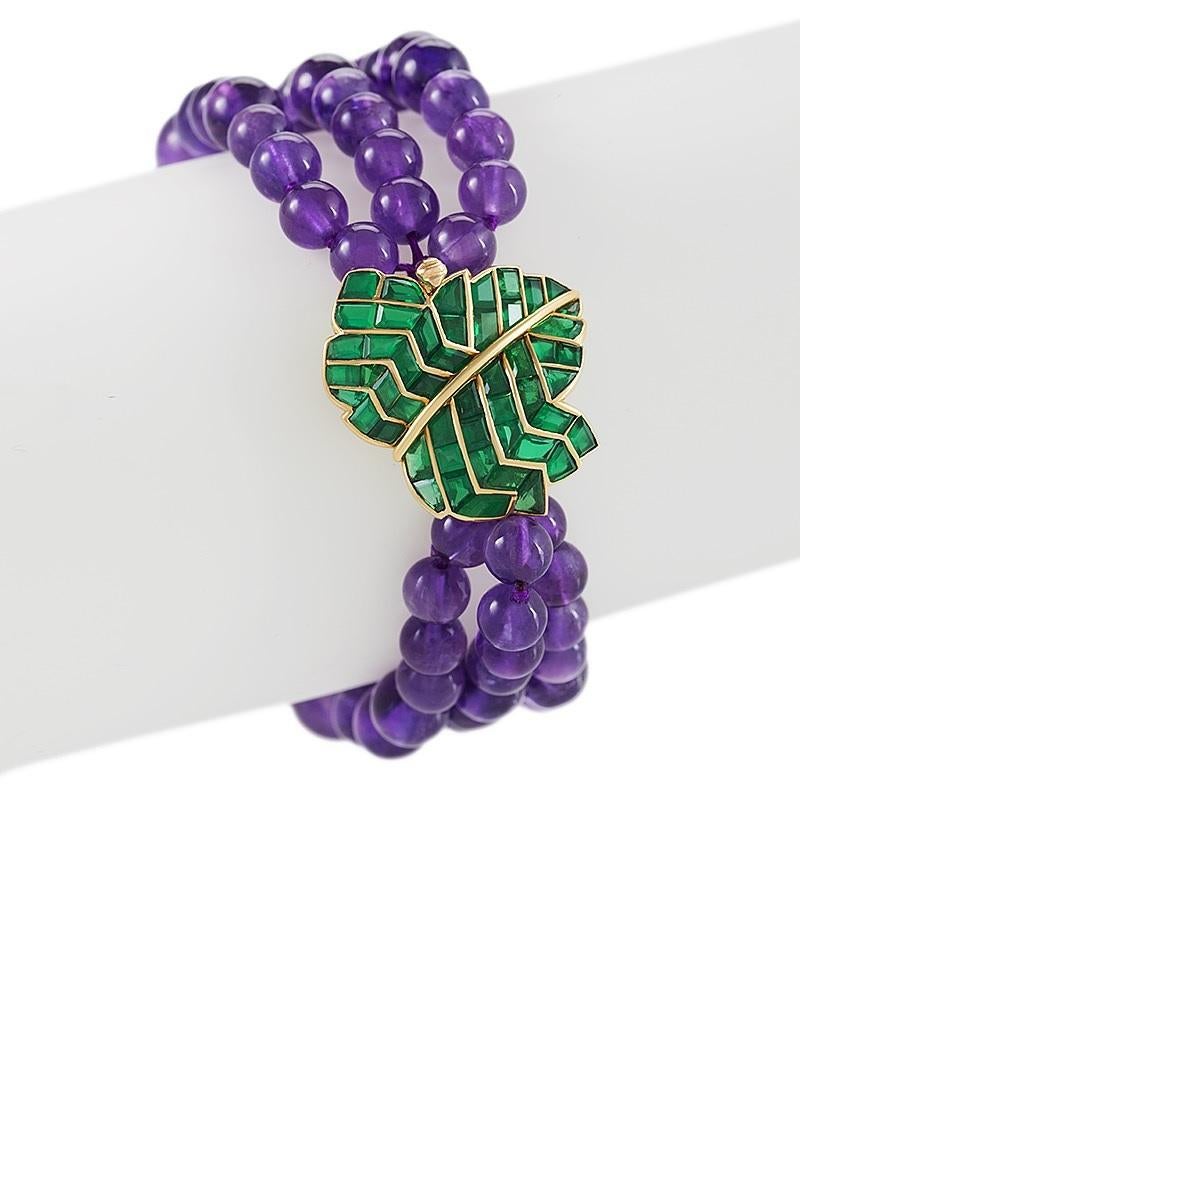 A French-Mid 20th Century18 karat gold bracelet with amethyst and emerald by René Boivin. The bracelet is composed of  66 graduated amethyst beads measuring 10.00 mm to 6.0 mm. The leaf clasp has 50 calibre cut emeralds with an approximate total